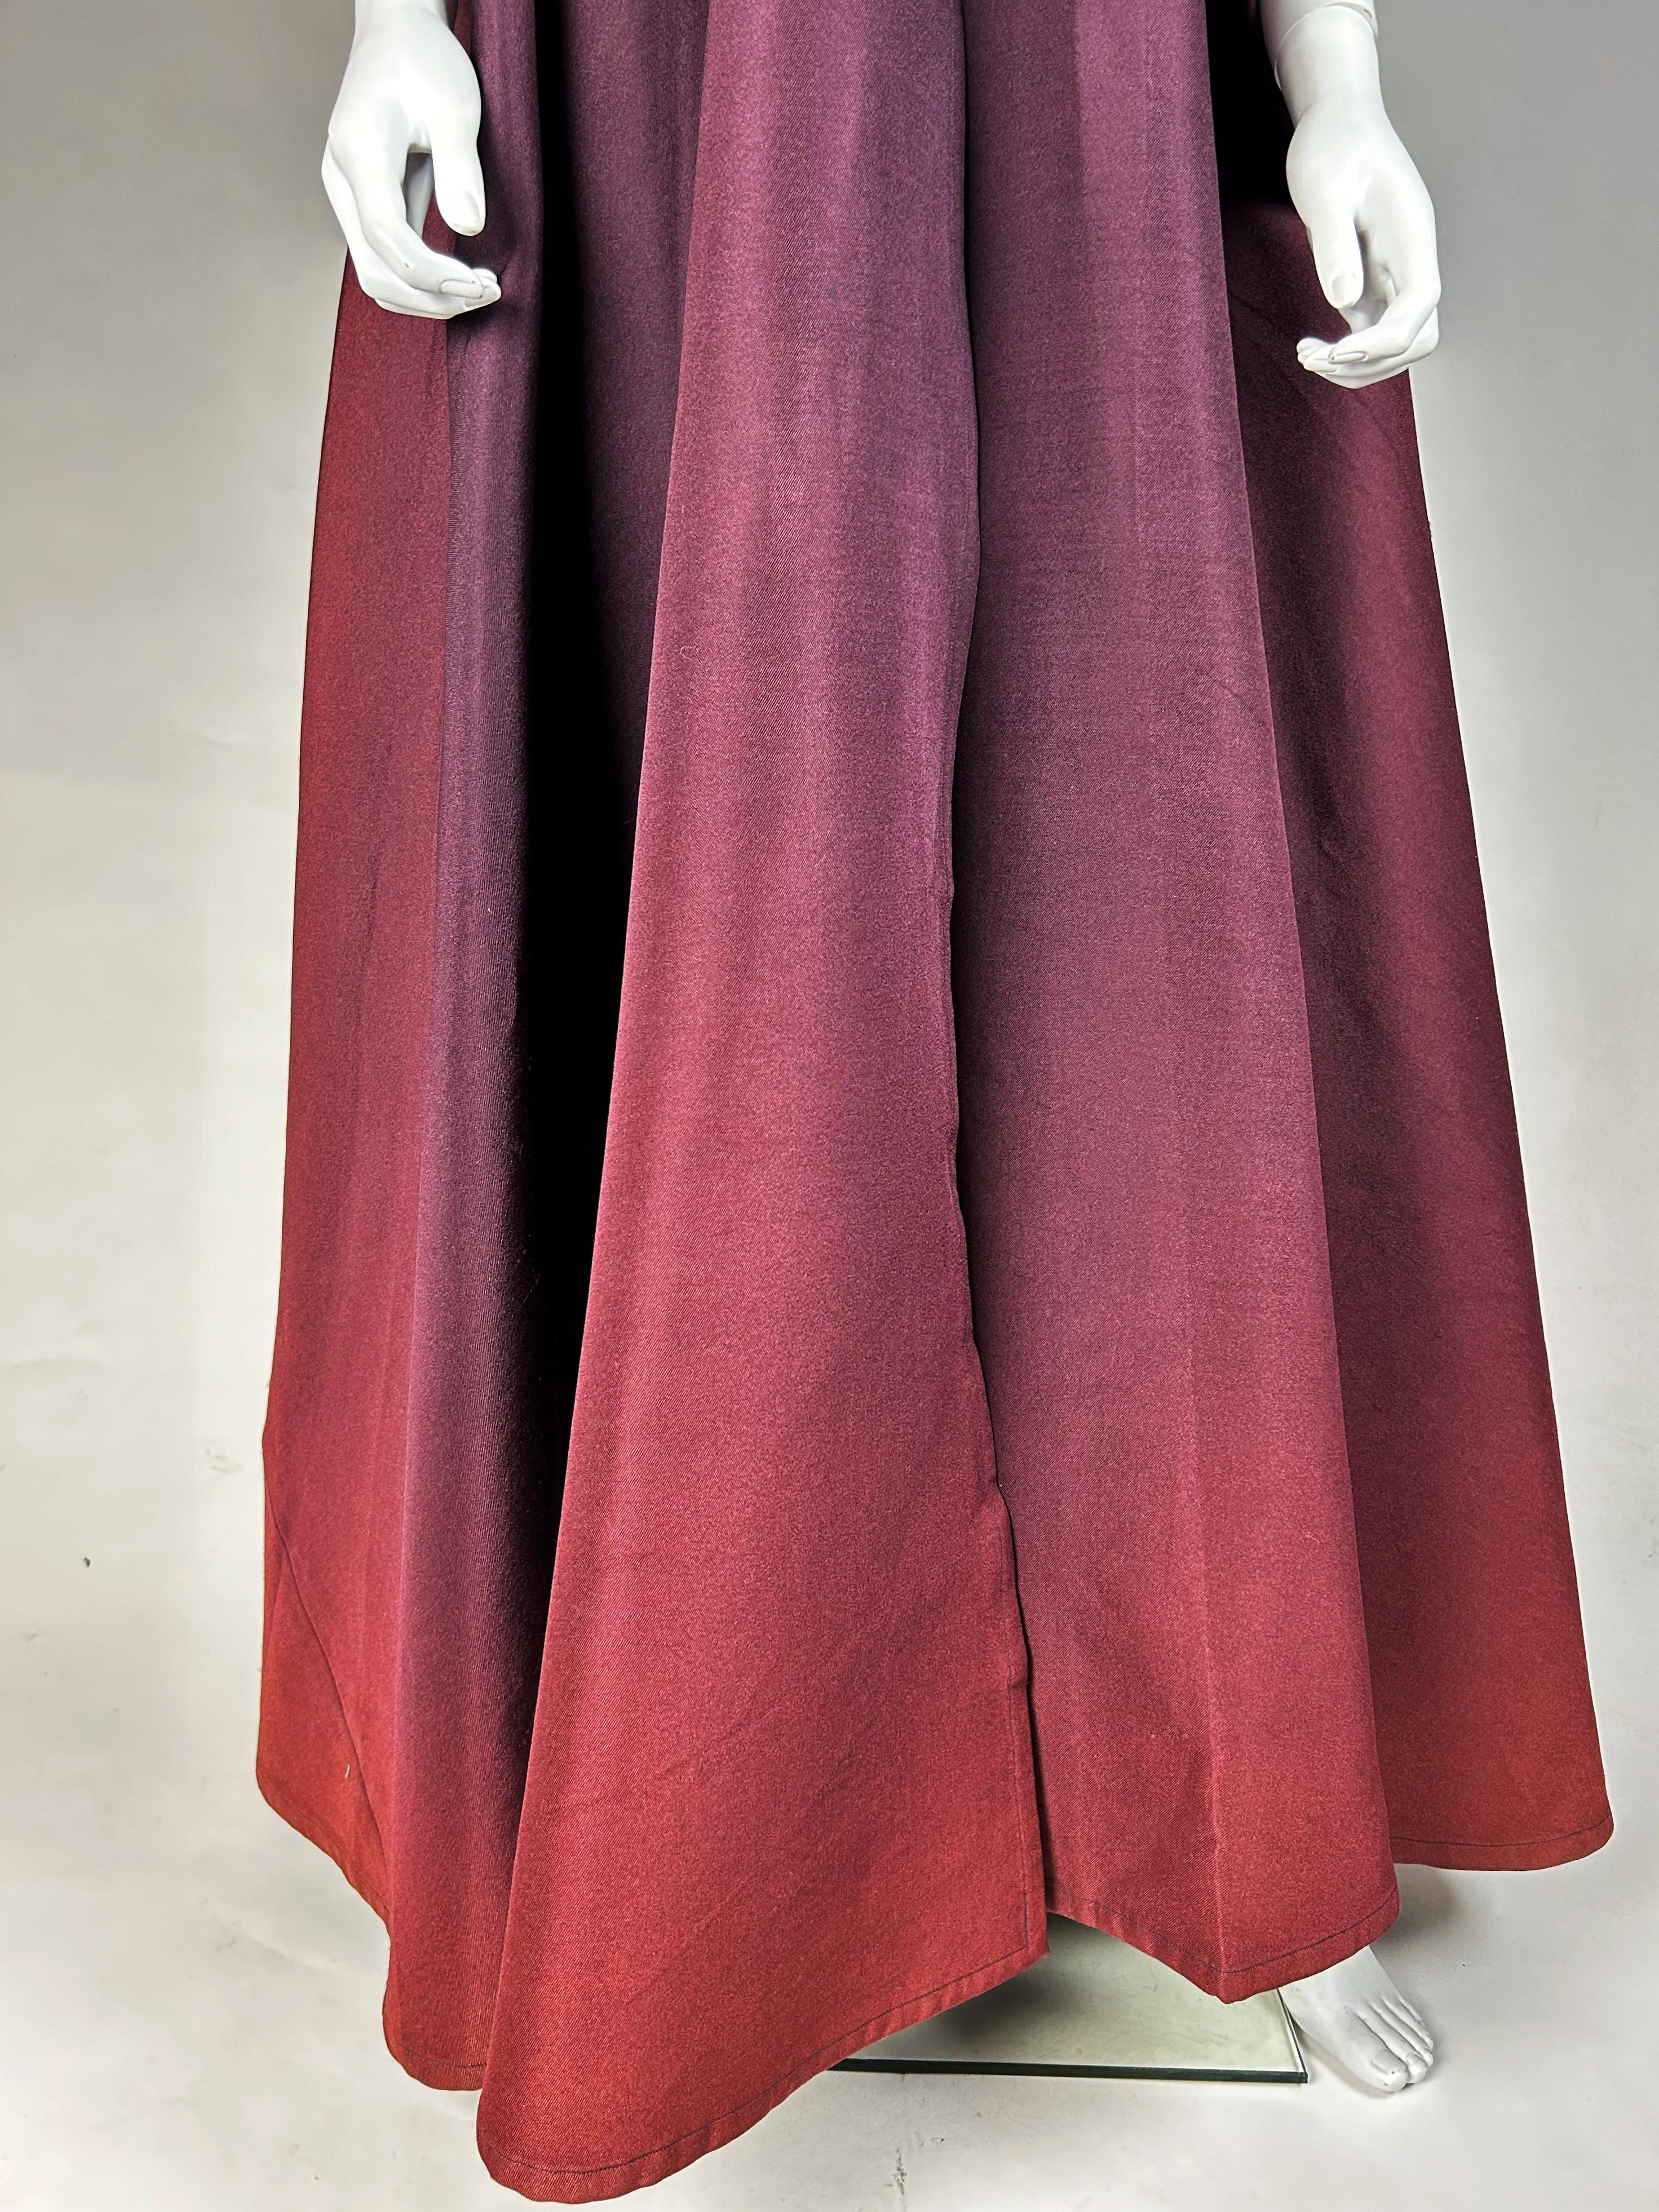 Women's Haute Couture fashion show cape by Madame Grès numbered 11633 Circa 1980 For Sale